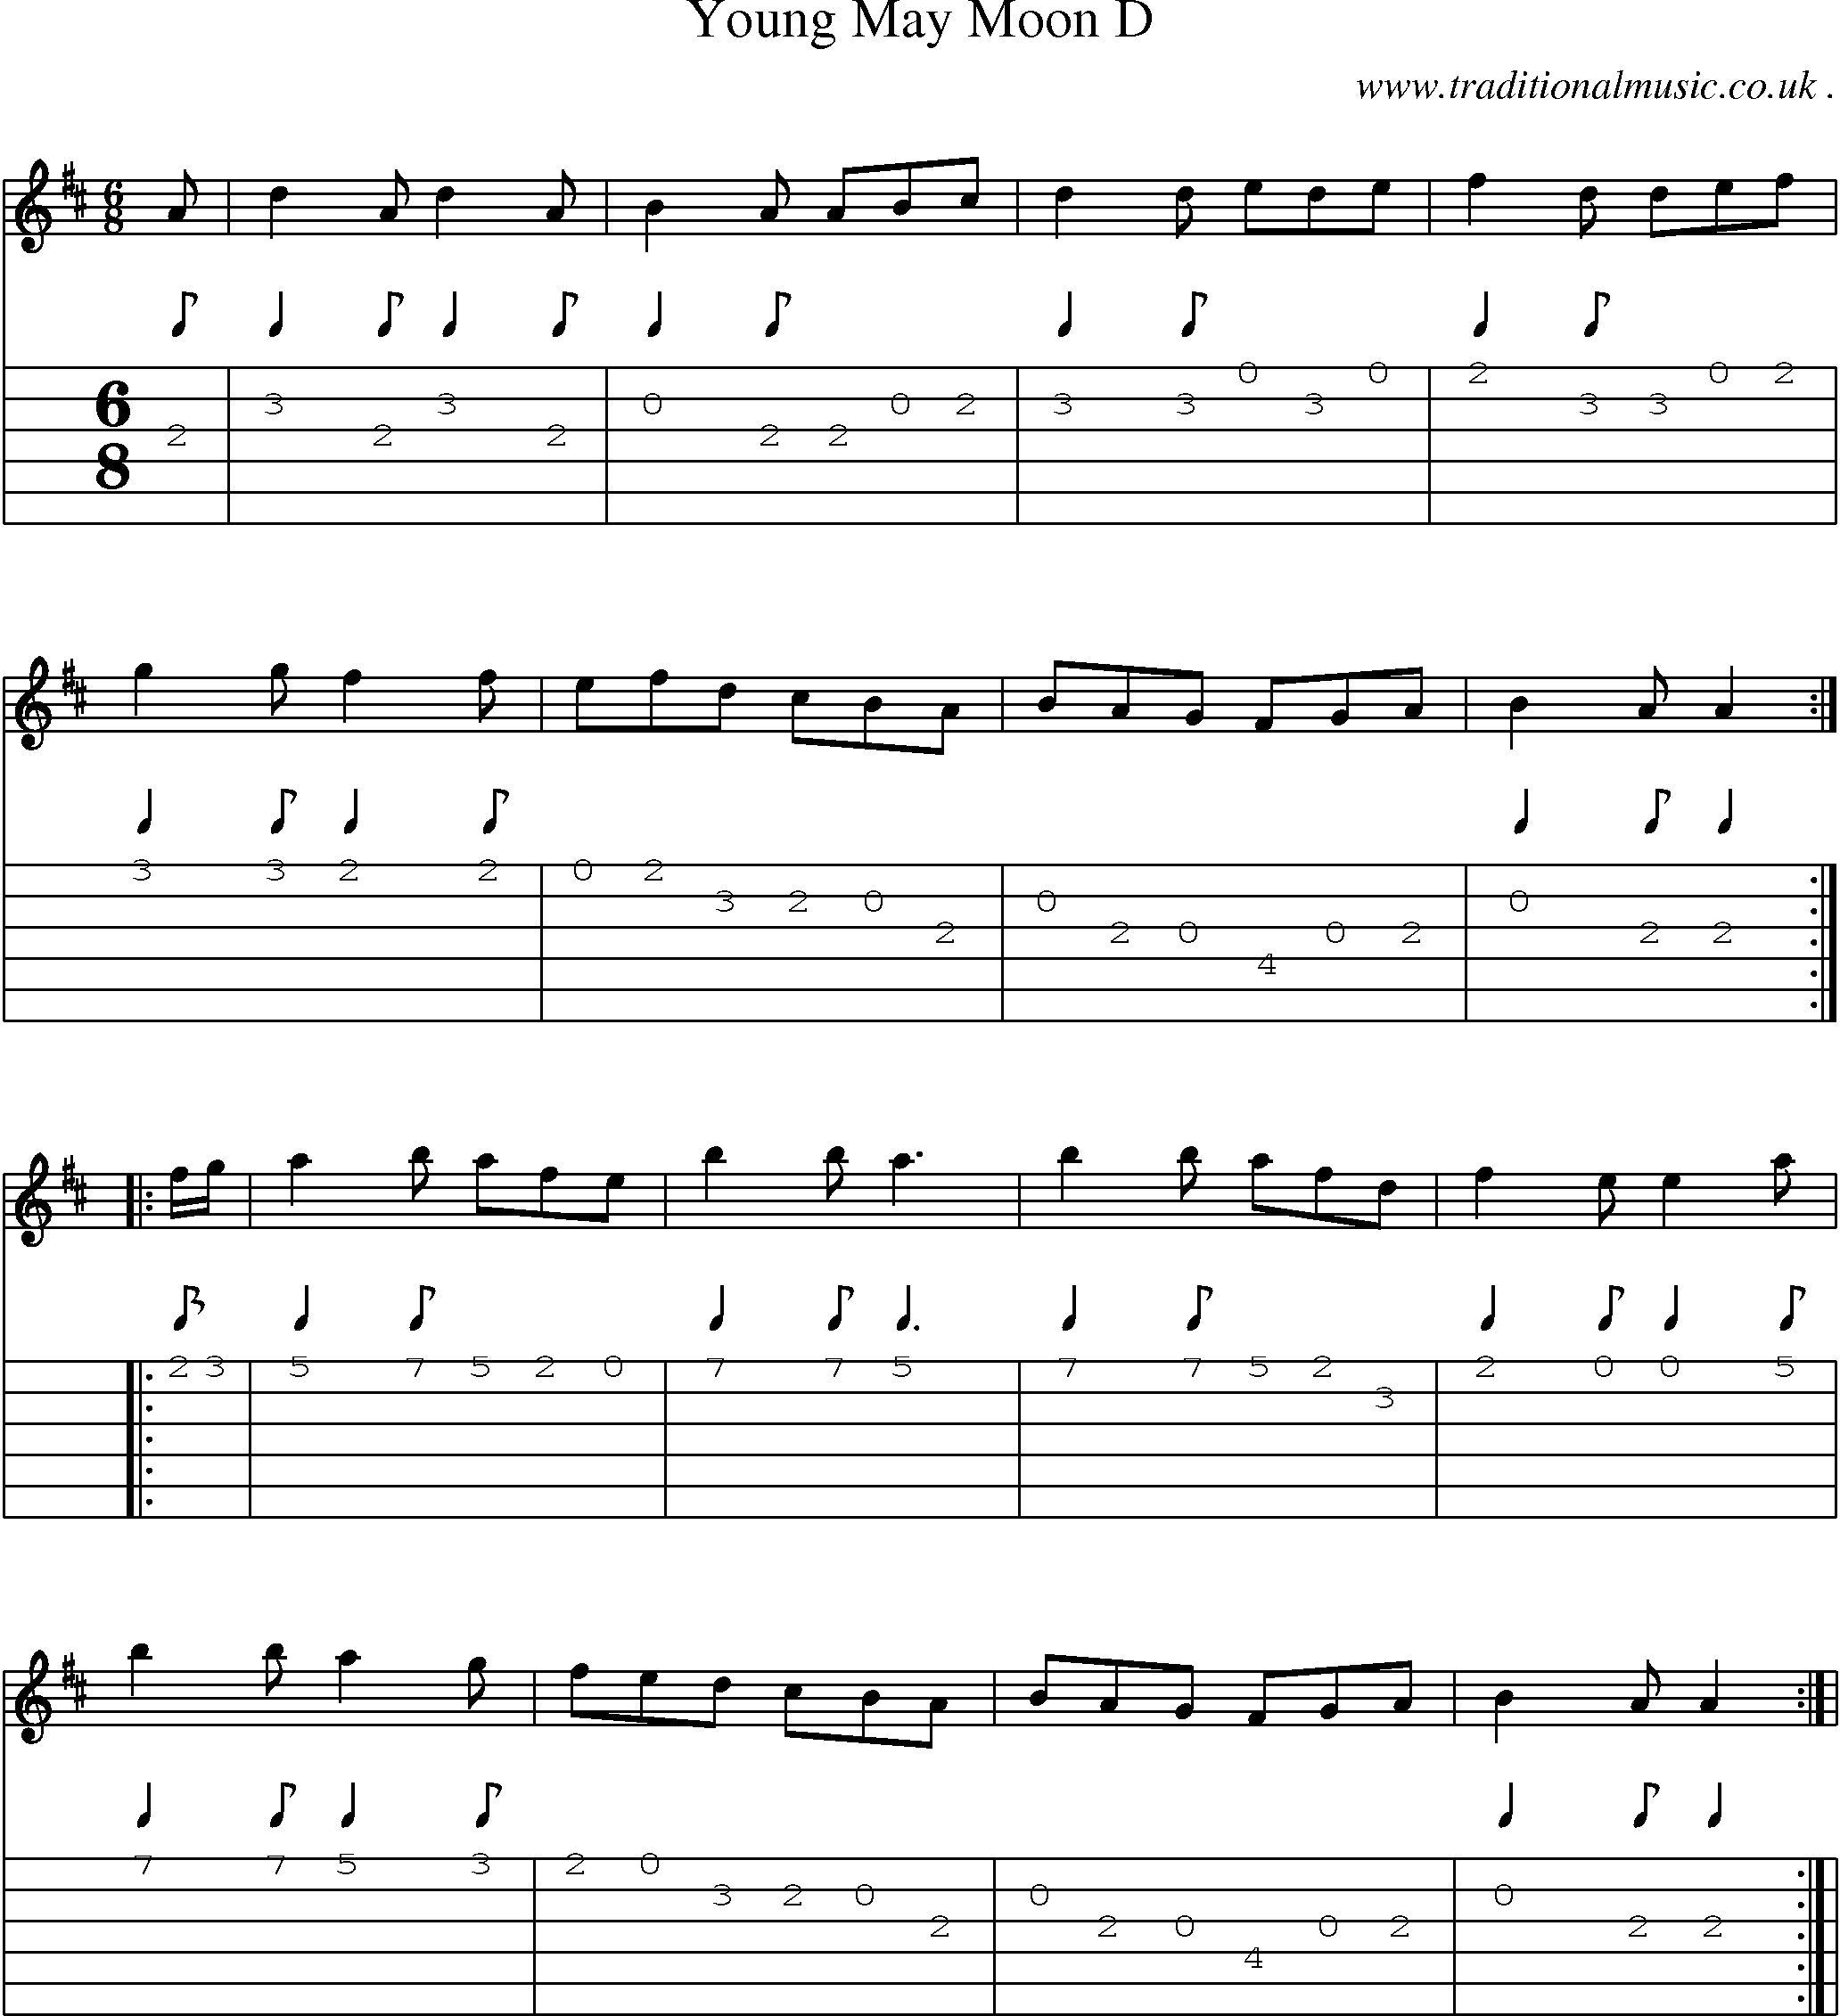 Sheet-Music and Guitar Tabs for Young May Moon D